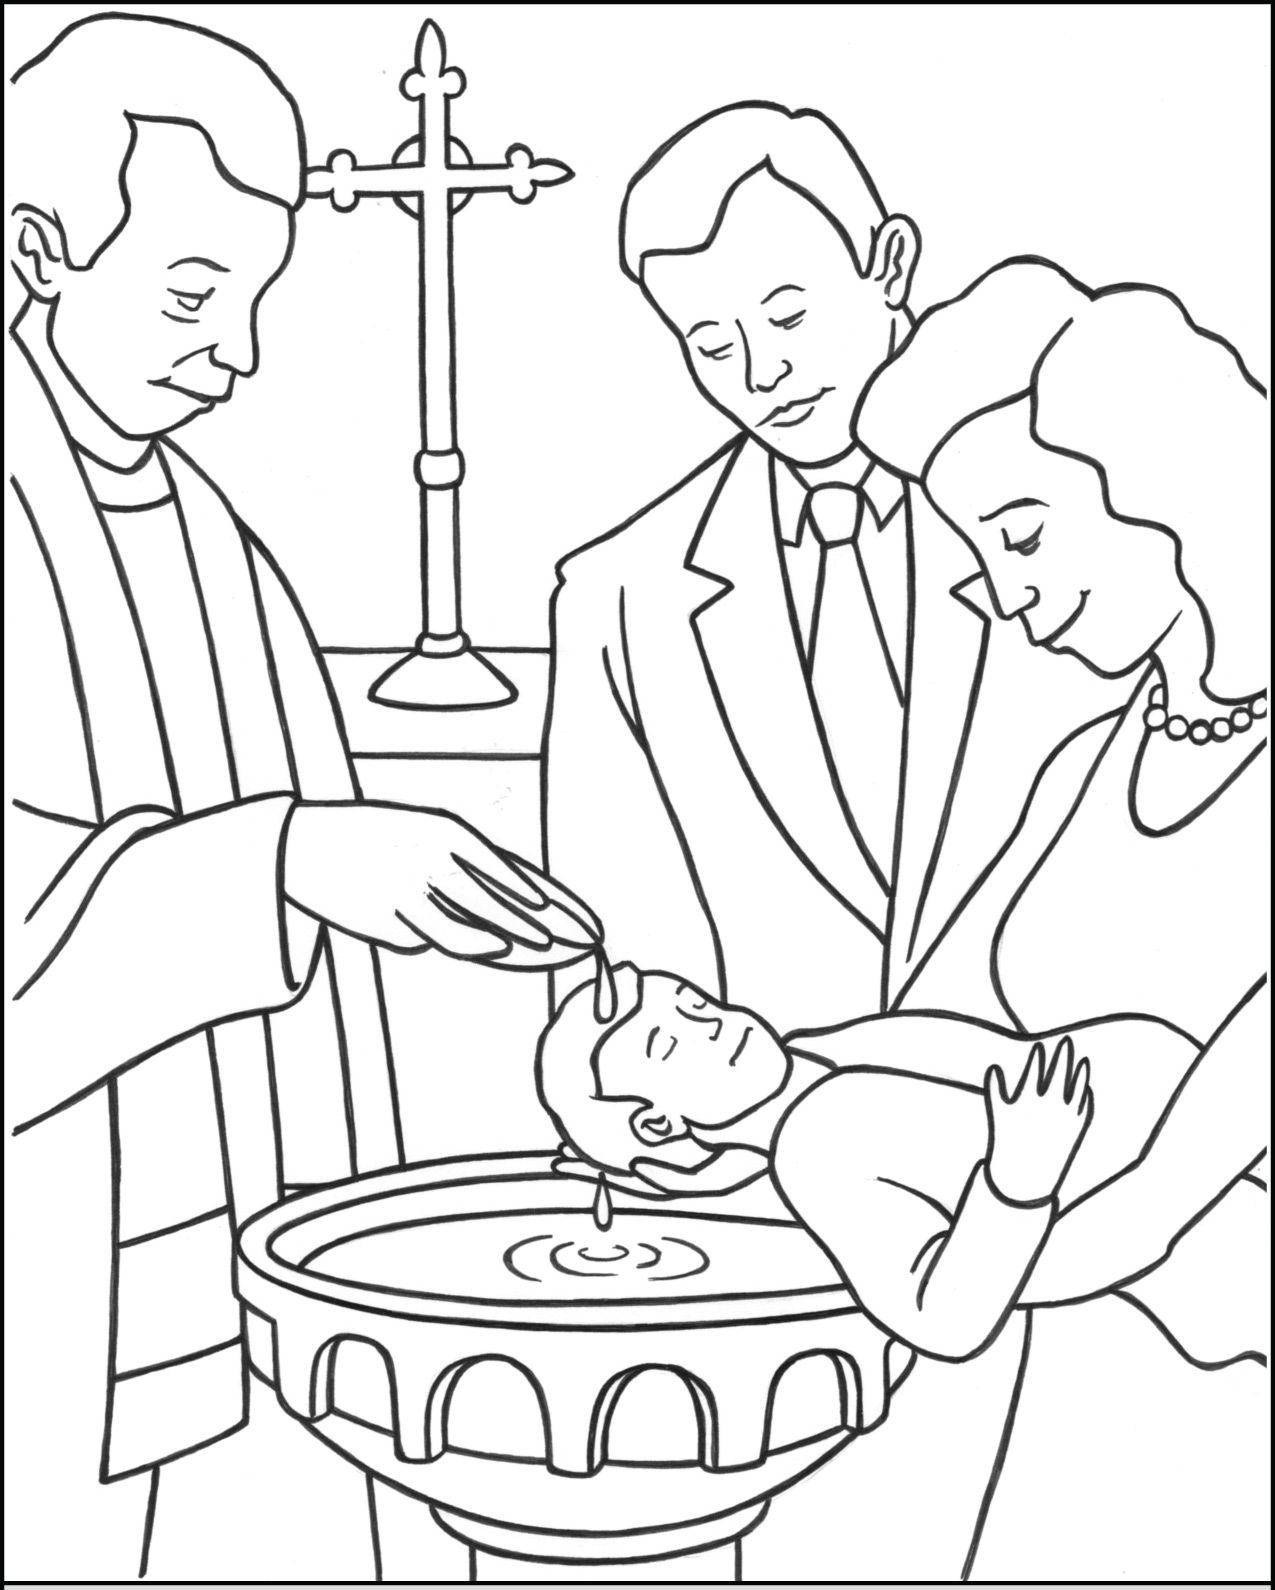 Baptism Coloring Pages Printable Pdf - Baptism Coloring Pages